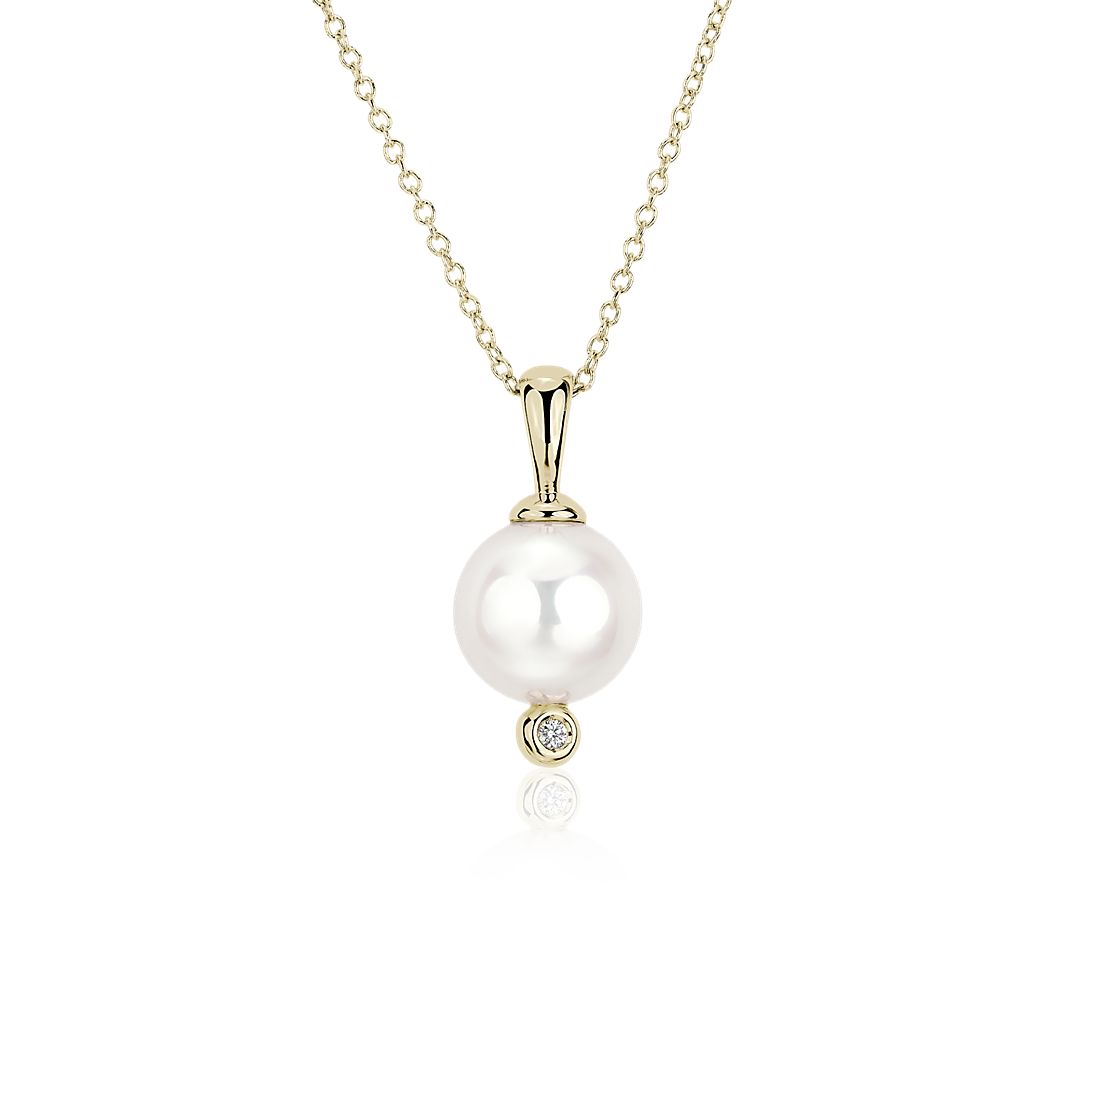 White Freshwater Pearl Pendant with Diamond Detail in 14k Yellow Gold (8.5-9mm)